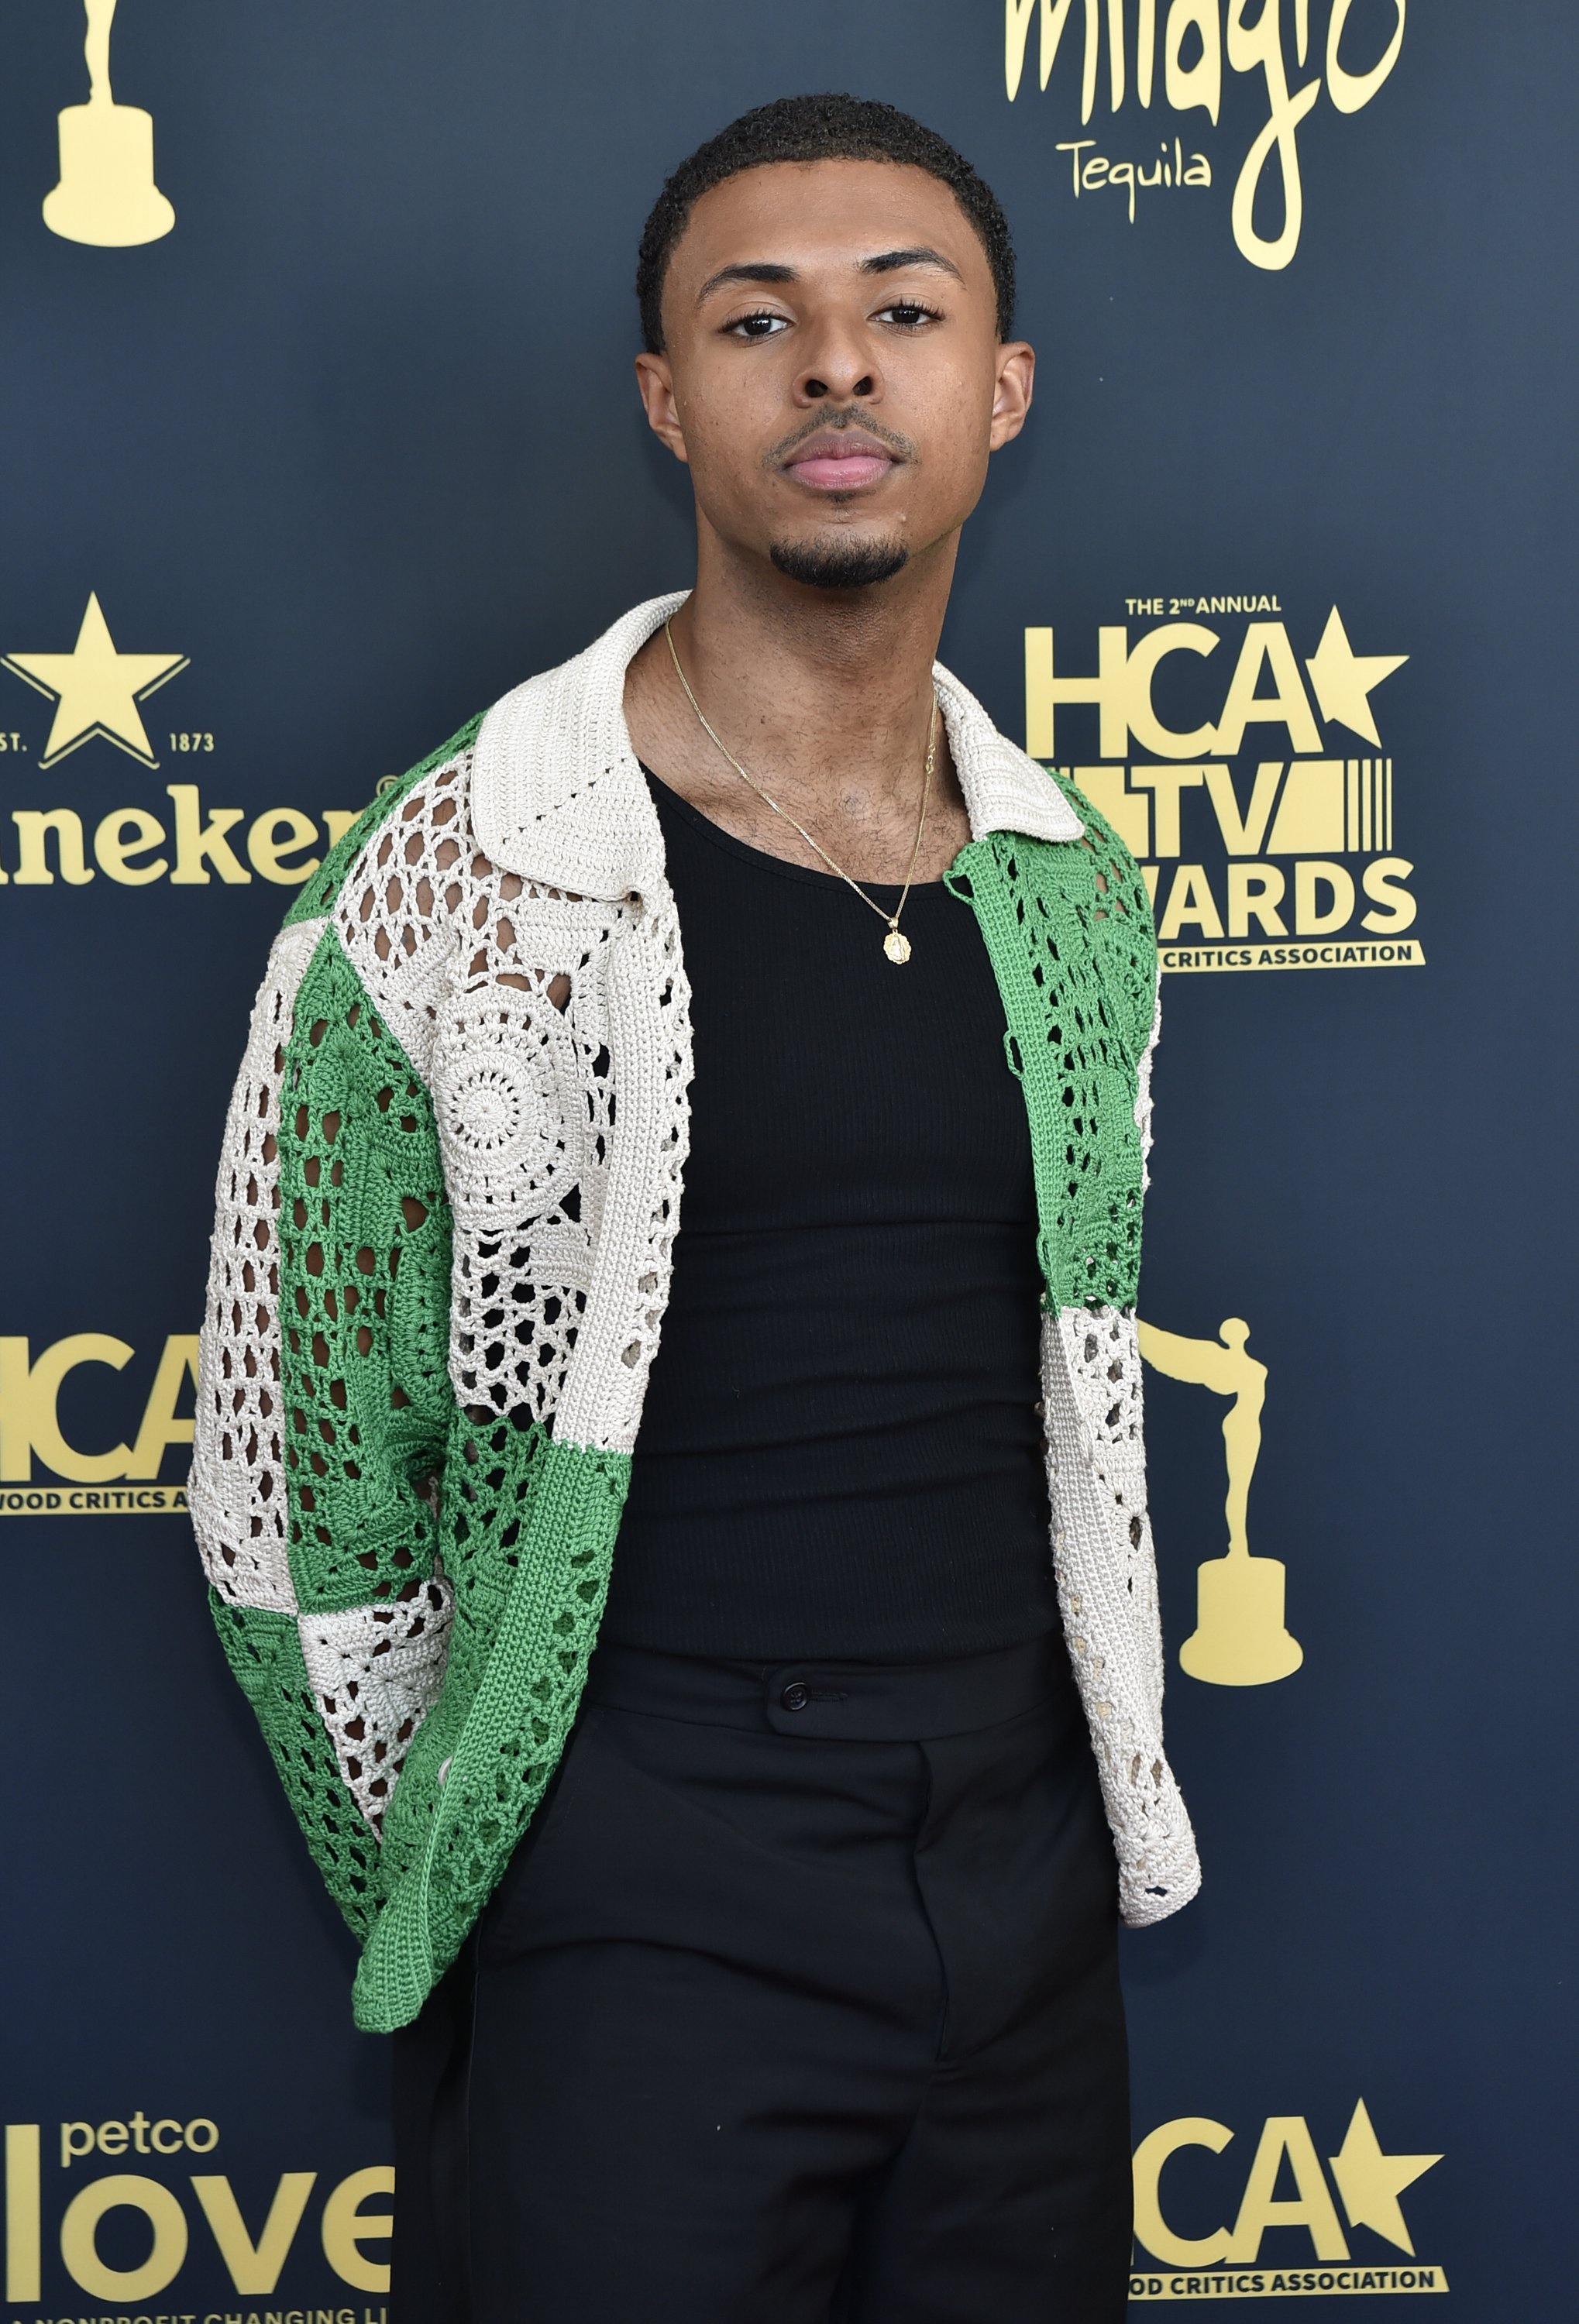 Diggy Simmons attends the Red Carpet of the 2nd Annual HCA TV Awards at The Beverly Hilton on August 13, 2022, in Beverly Hills, California. | Source: Getty Images